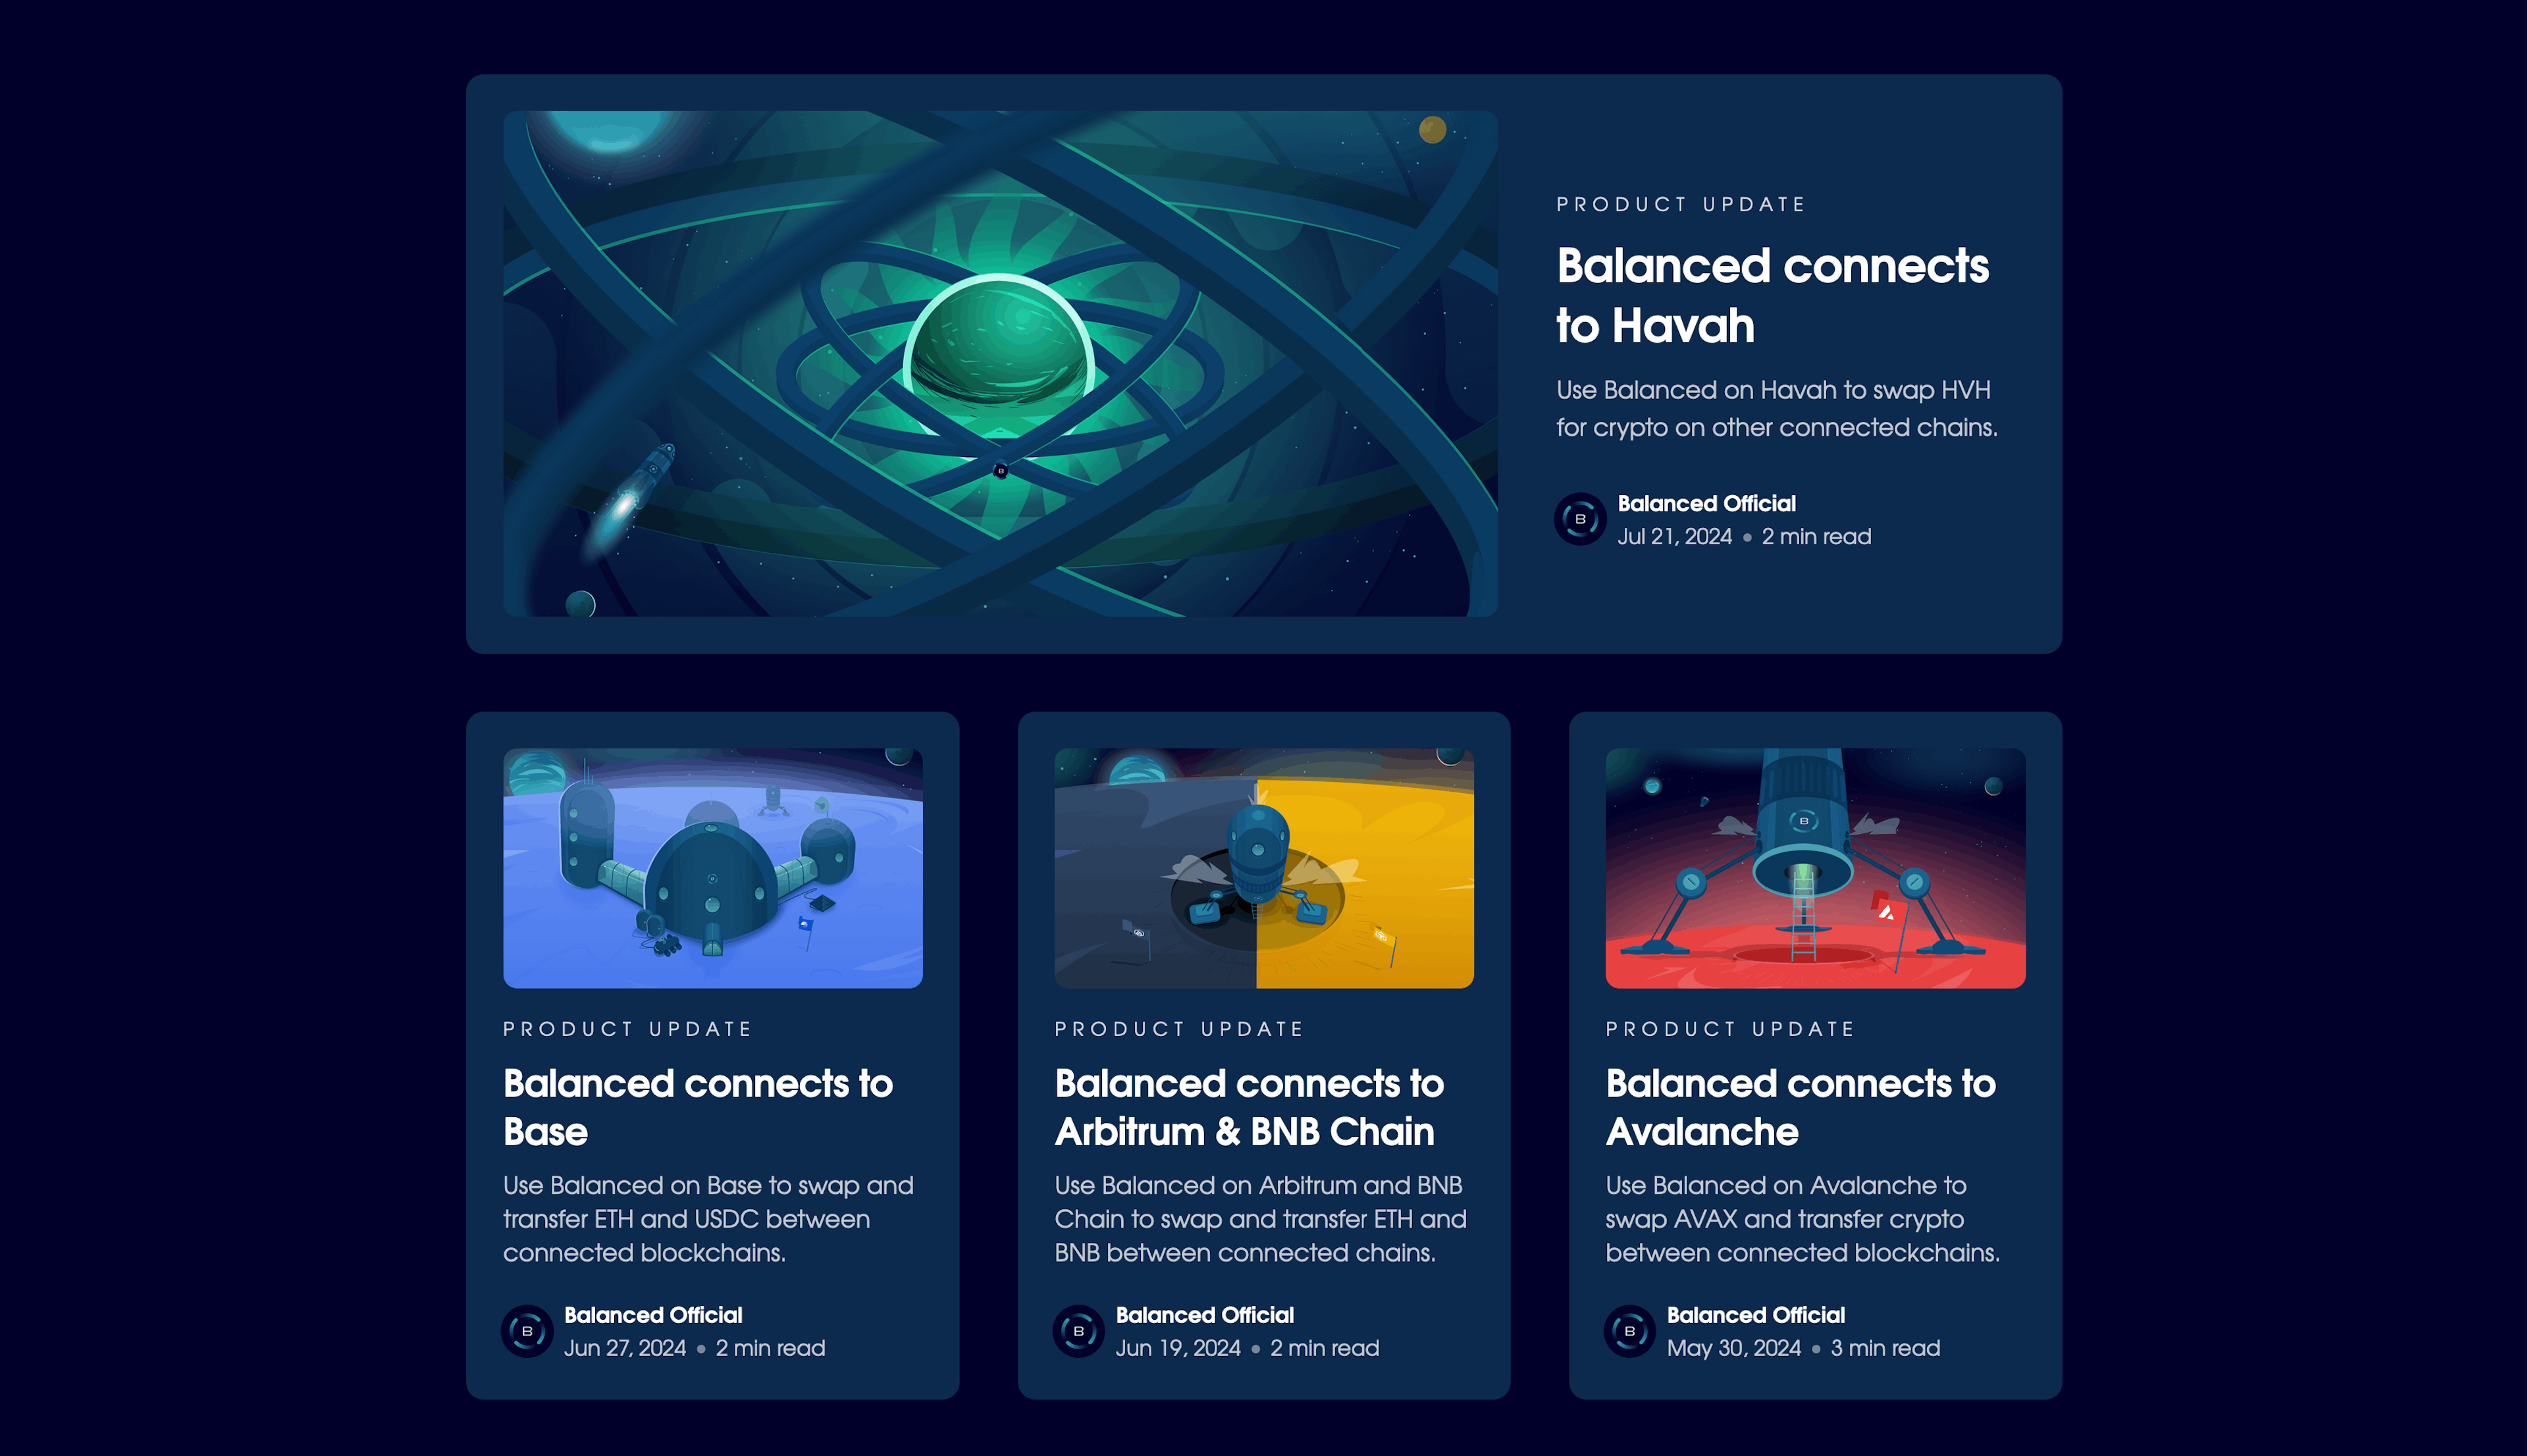 The Balanced blog, showcasing the five new connections.